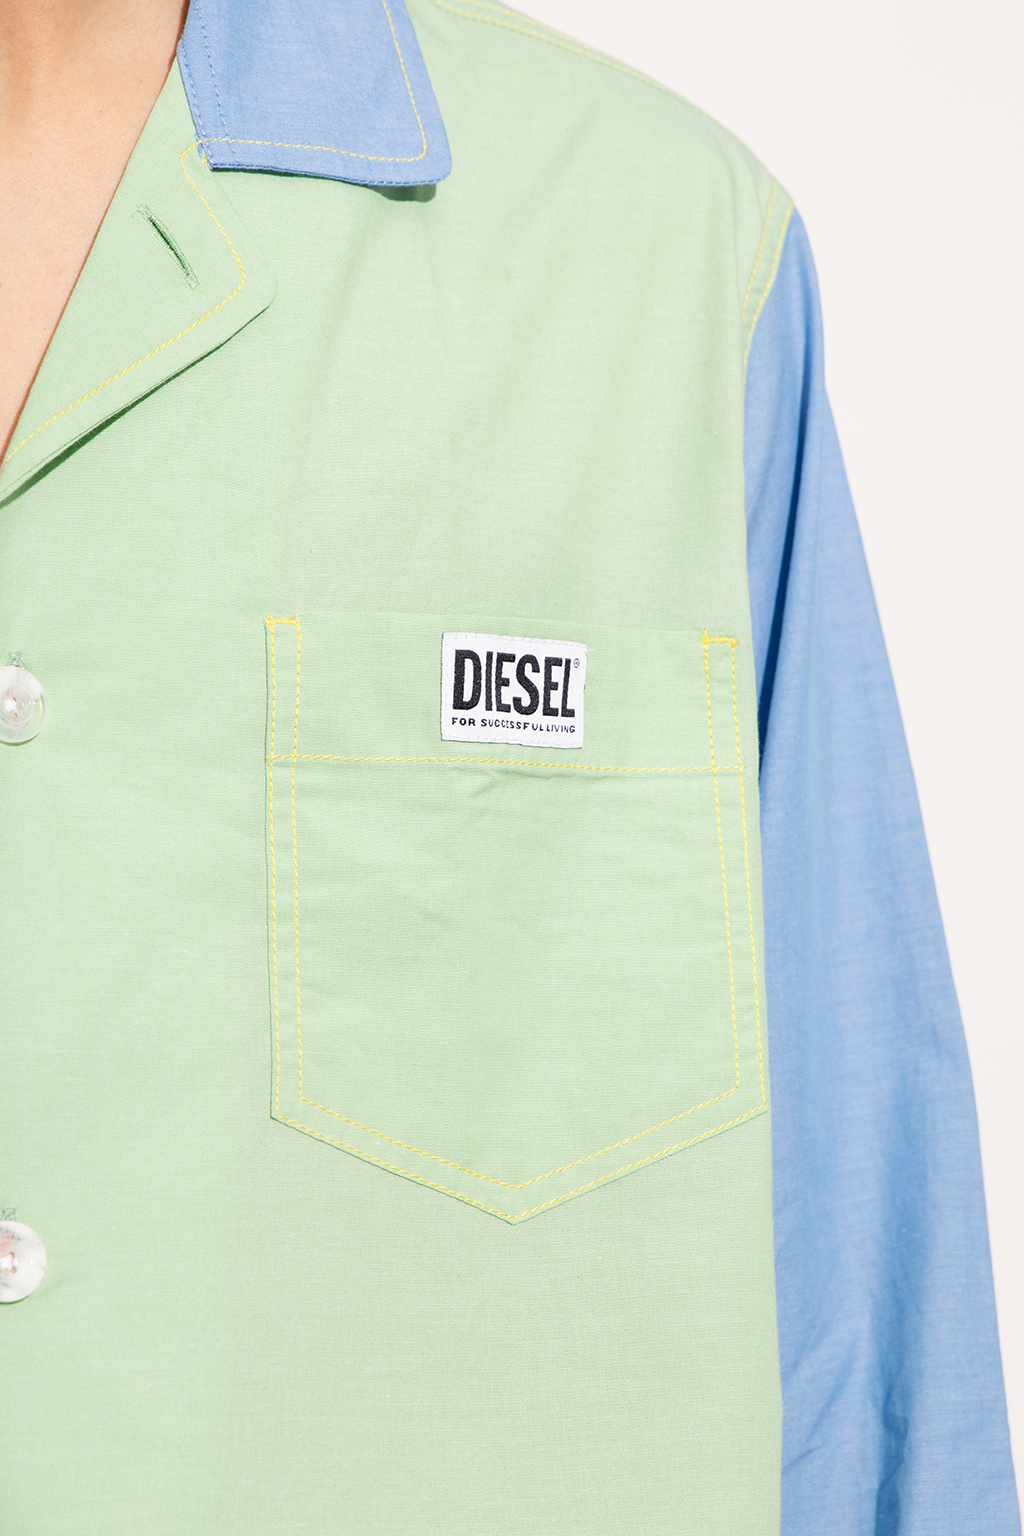 Diesel Boys clothes 4-14 years